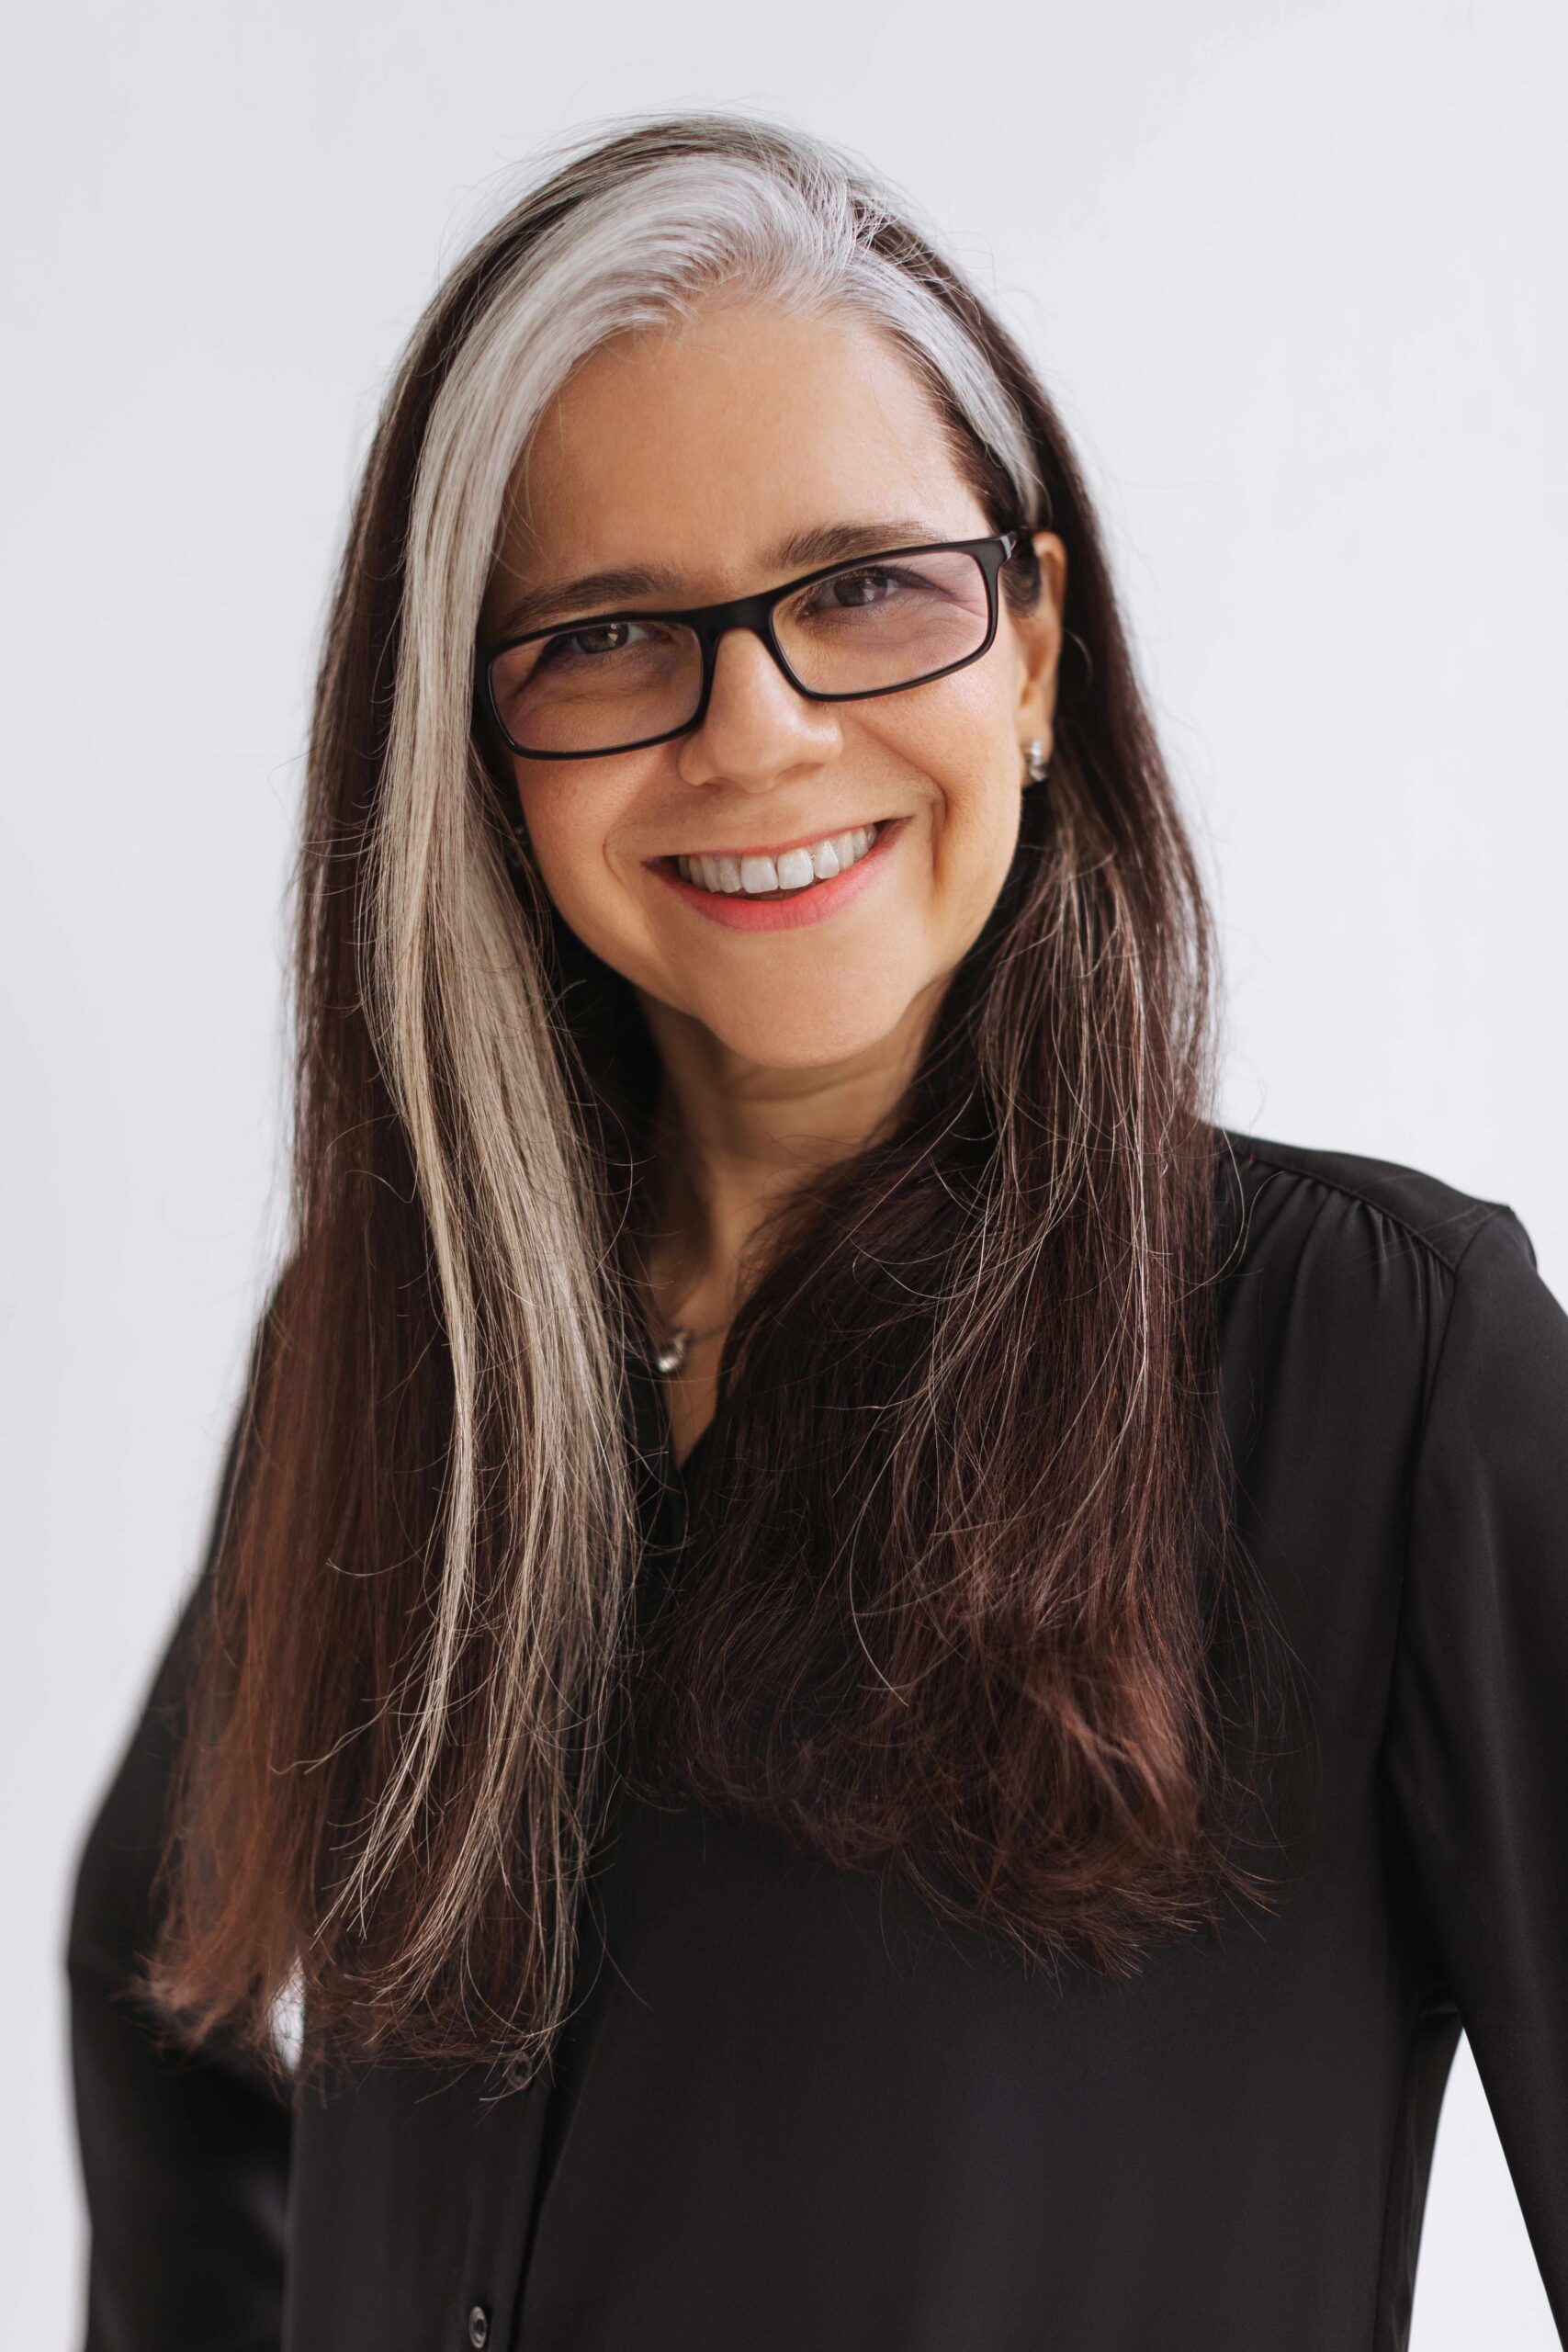 A middle-aged woman in black. Her hair is long with a stunning streak of white.